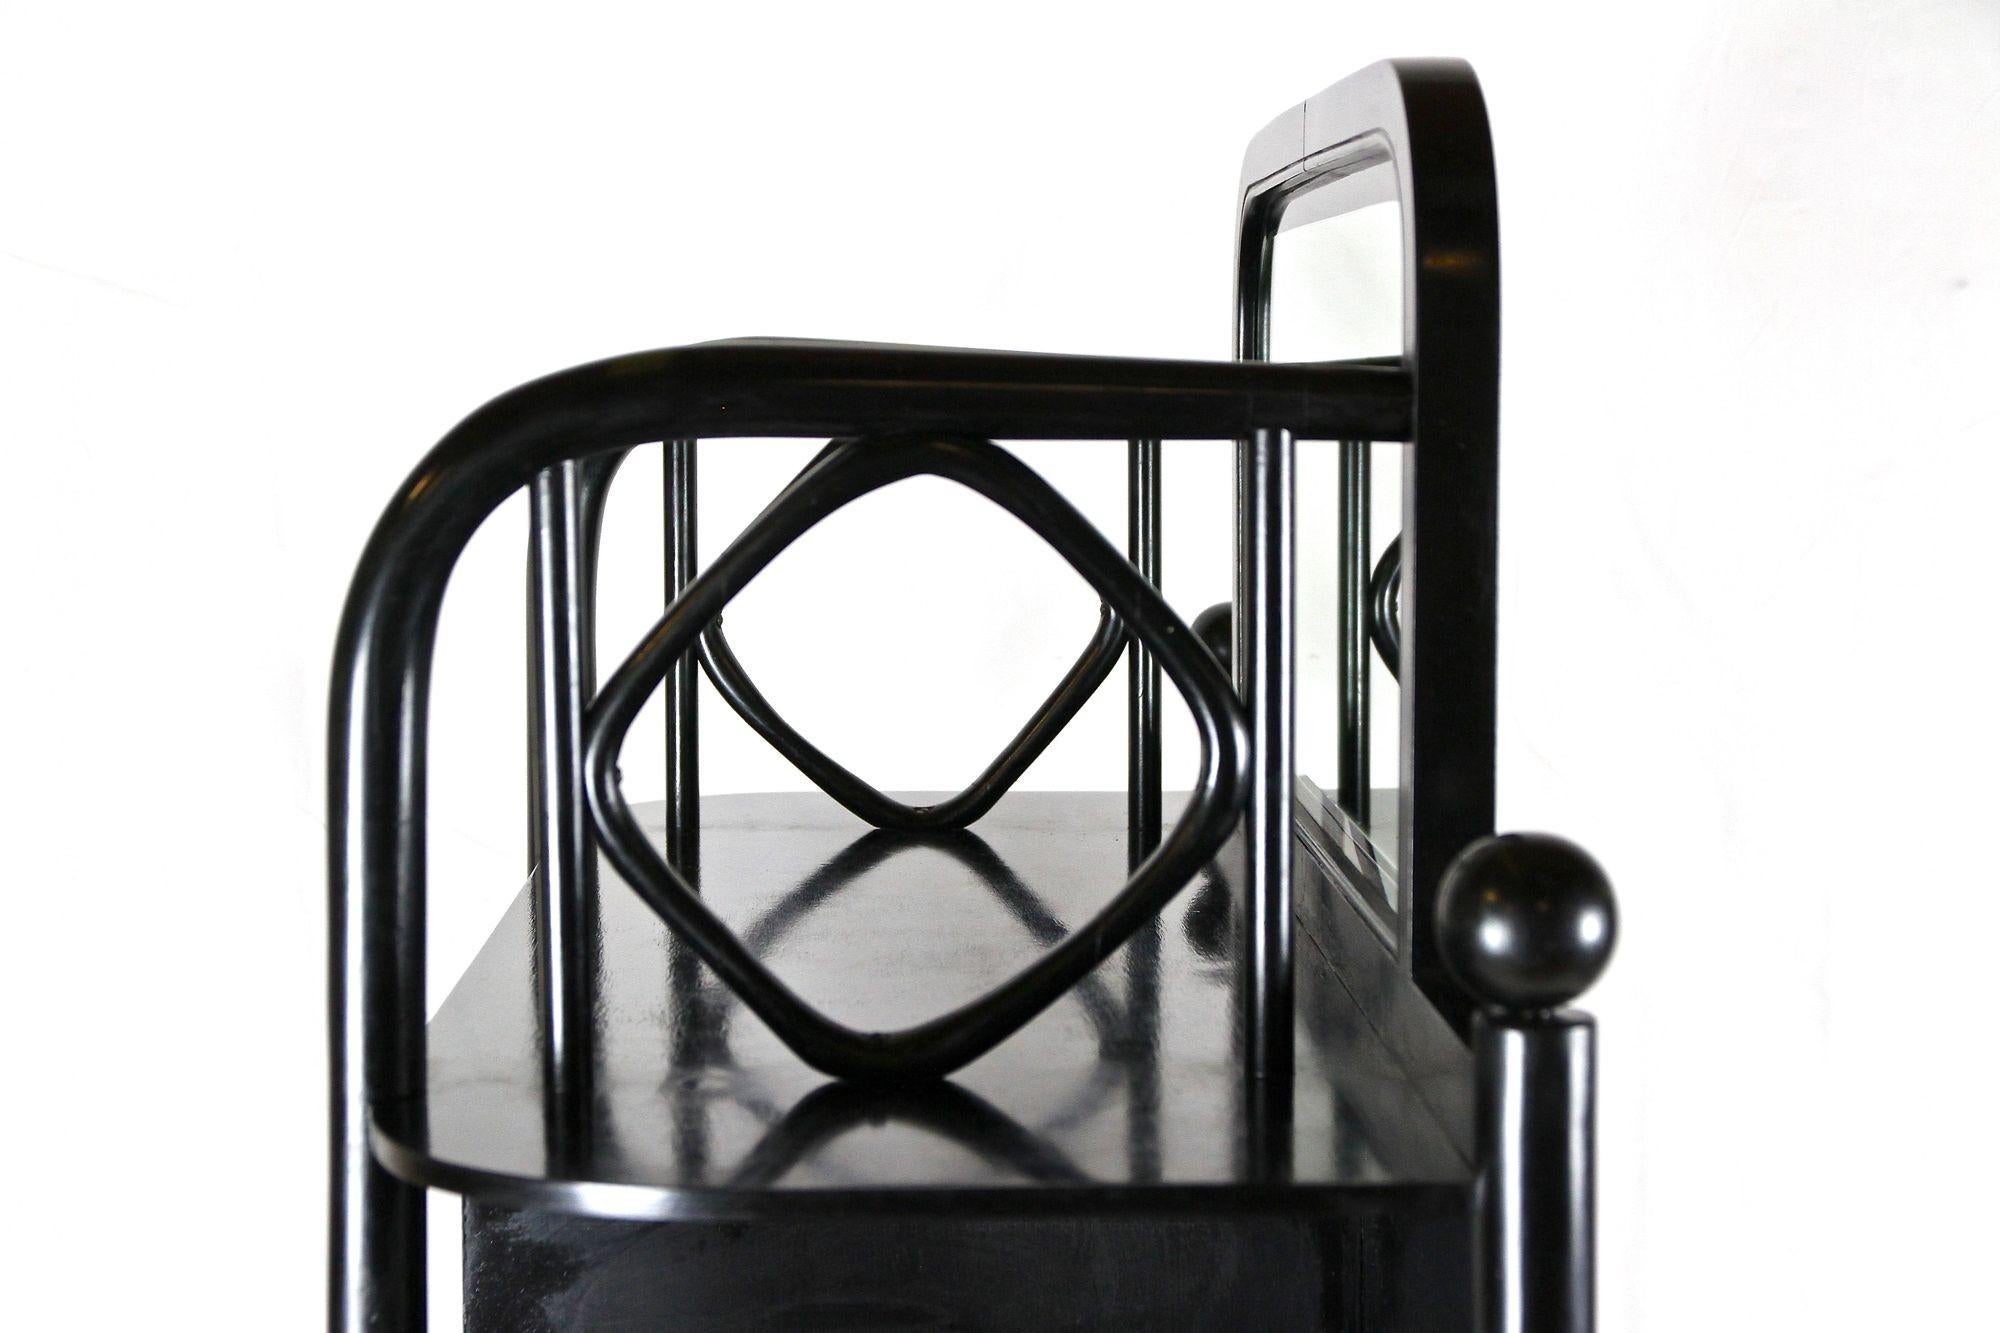 Black Art Nouveau Display Cabinet by Josef Hoffmann for Thonet, AT ca. 1905 For Sale 6